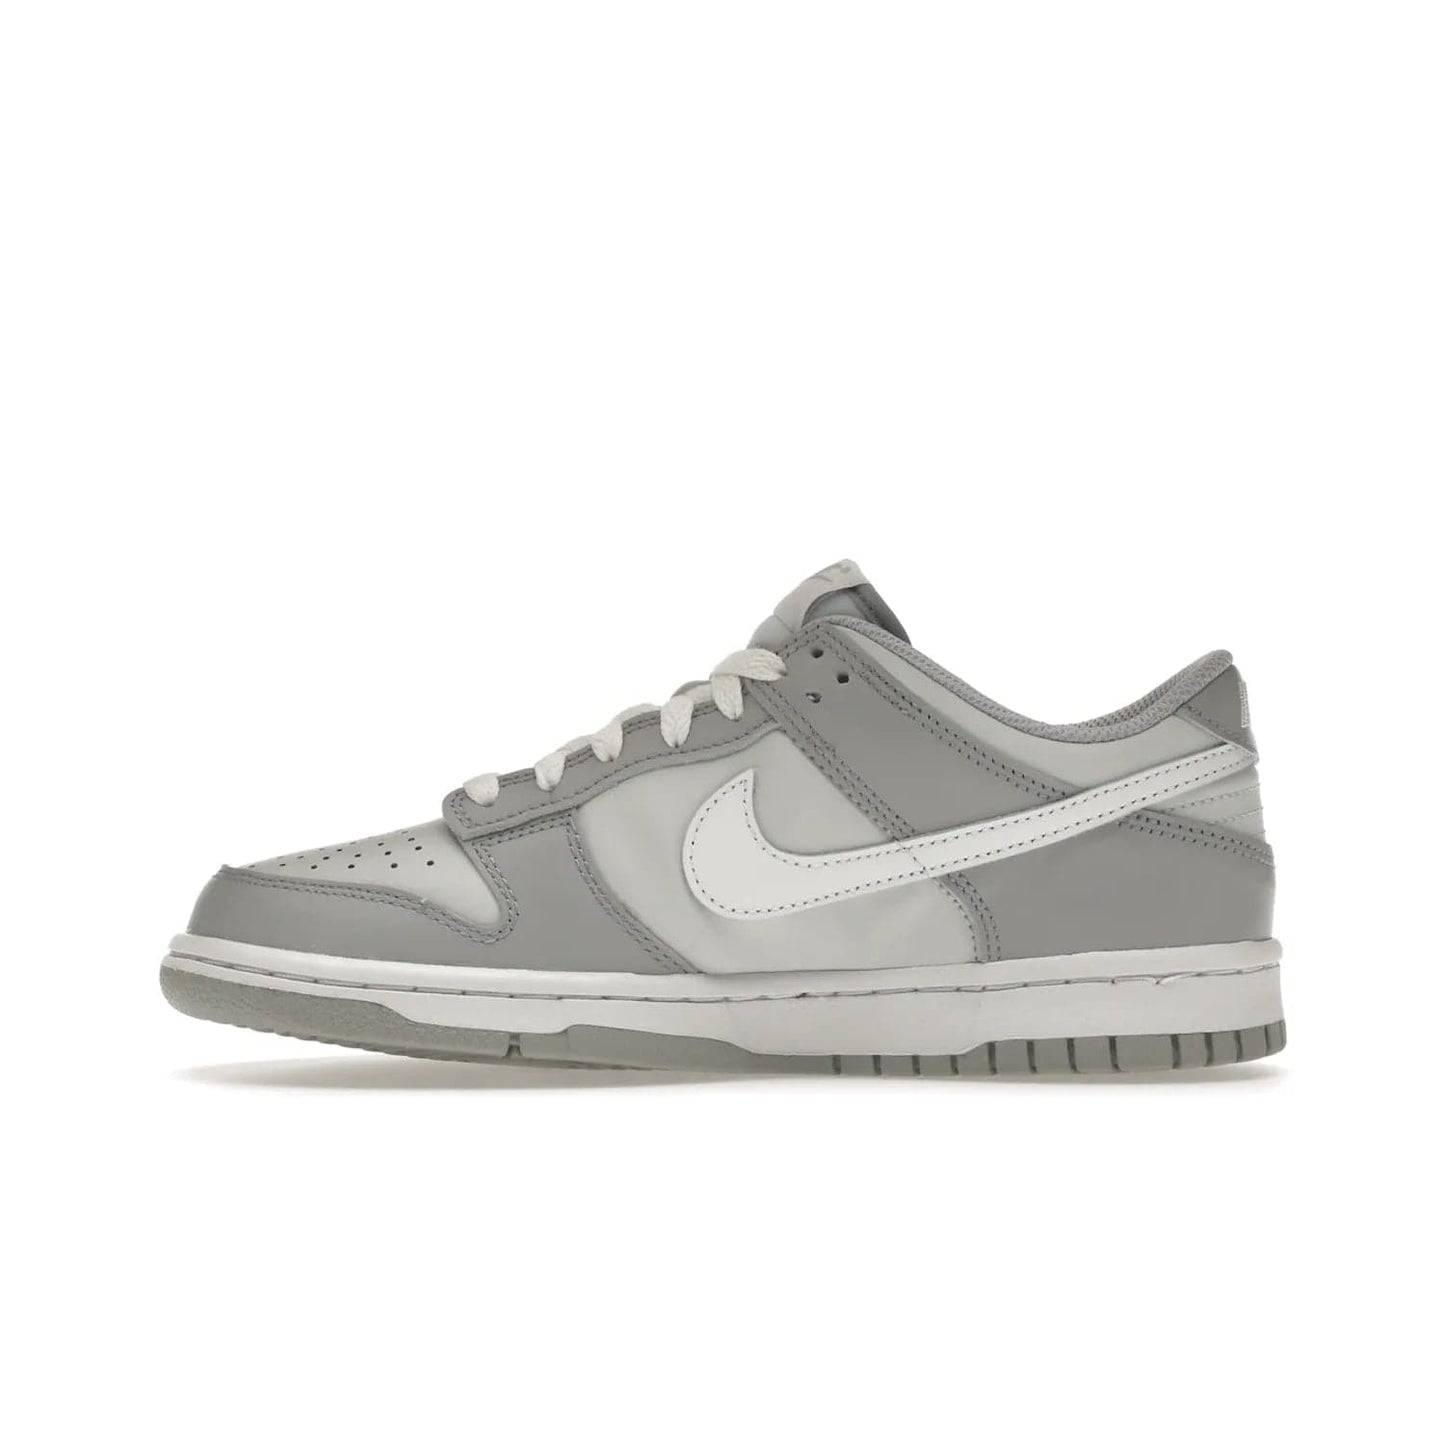 Nike Dunk Low Two-Toned Grey (GS) - Image 19 - Only at www.BallersClubKickz.com - Stylish Nike Dunk Low GS Two-Toned Grey featuring leather build, light/dark grey shades, white Swoosh logo & gray rubber outsole. Get ready to make a statement with this timeless classic released in March 2022.